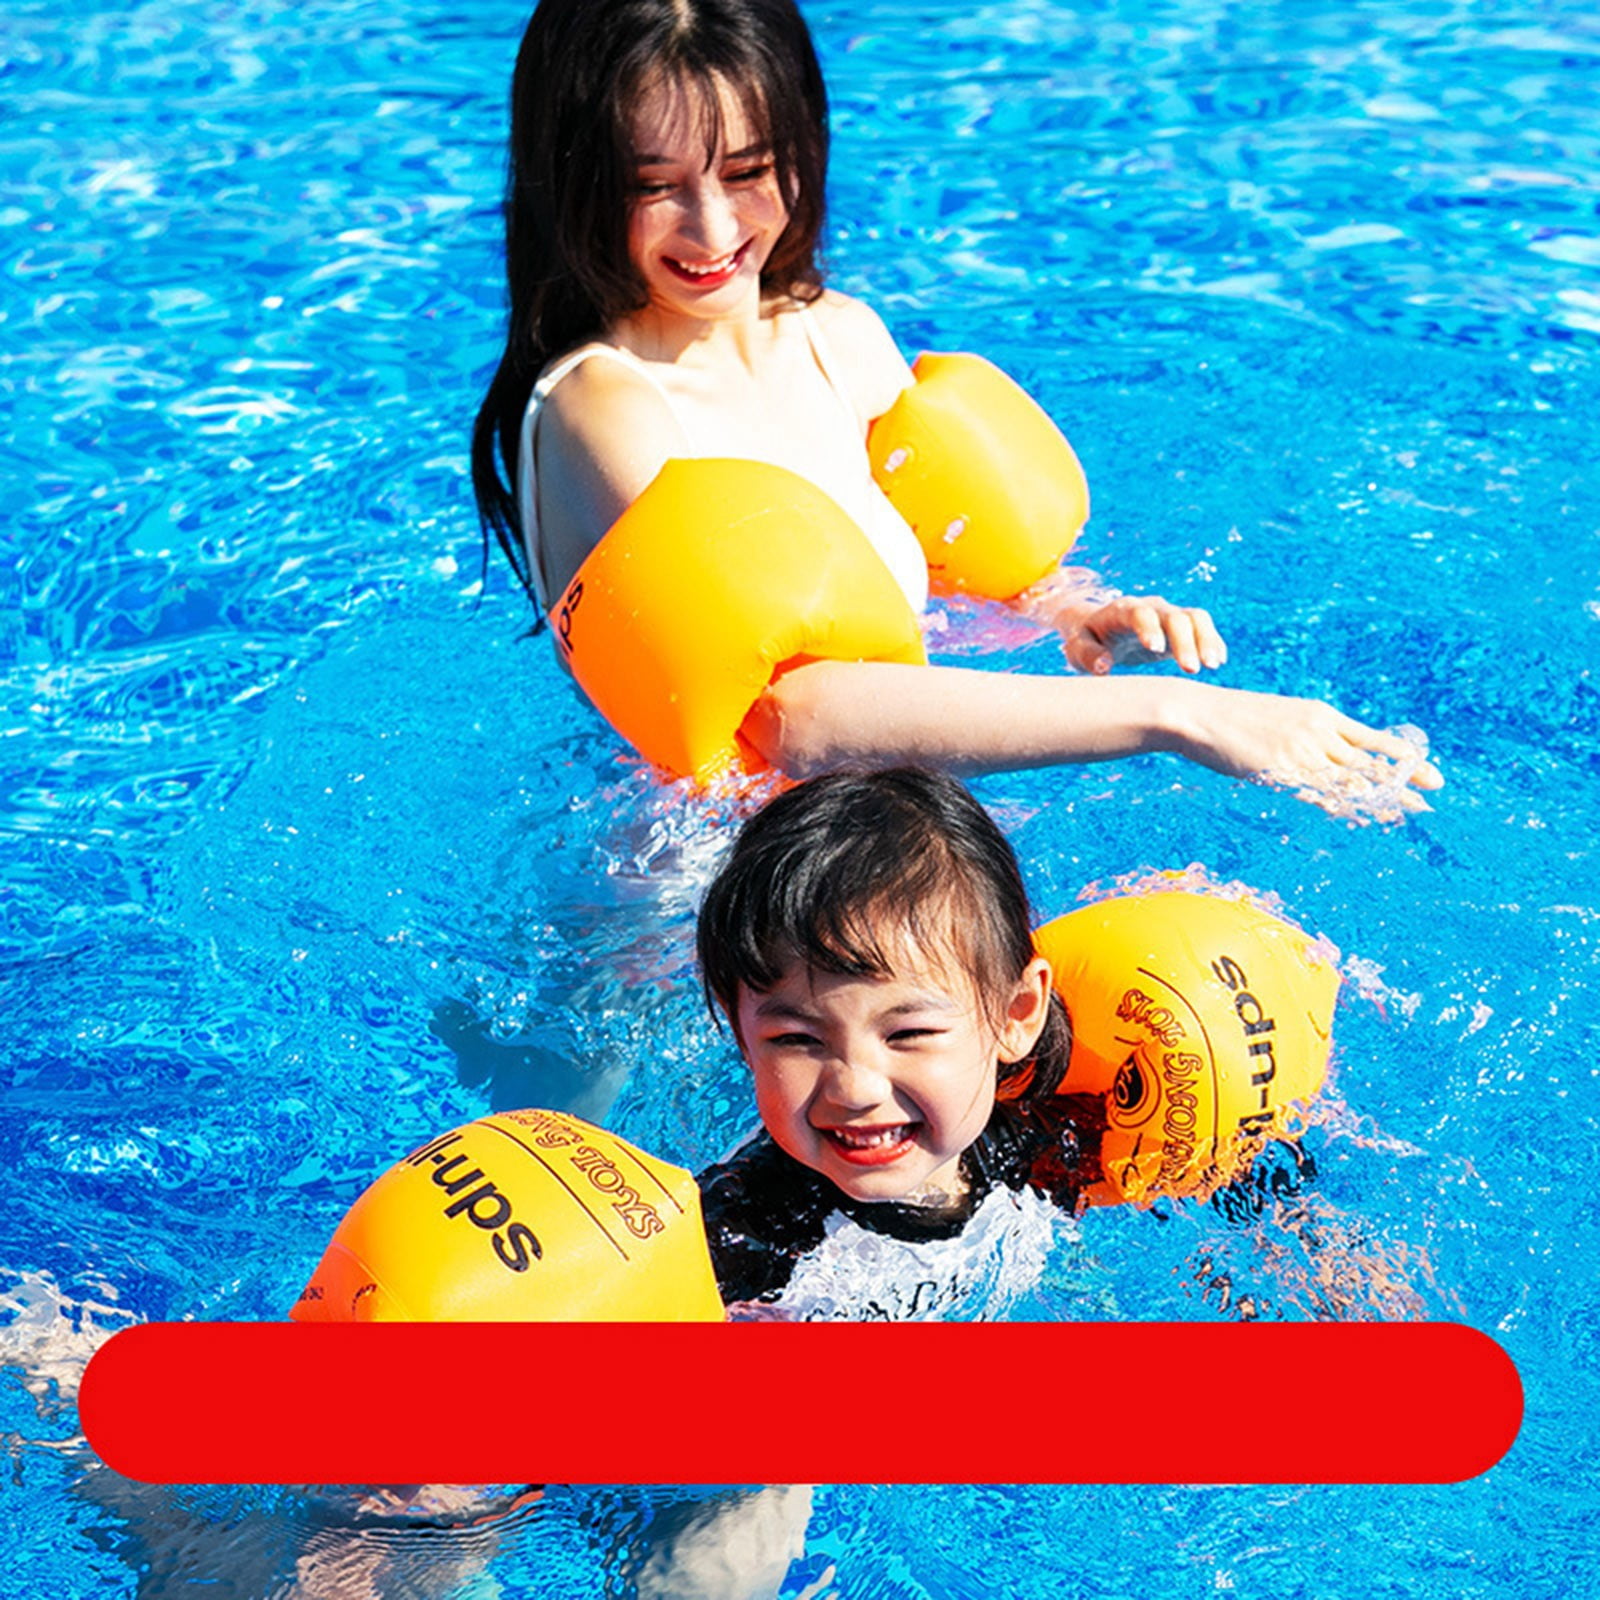 Details about   Kids Swimming Floats Ring Arm Sleeve Swim Float Armbands Child Pool Safety Gear 